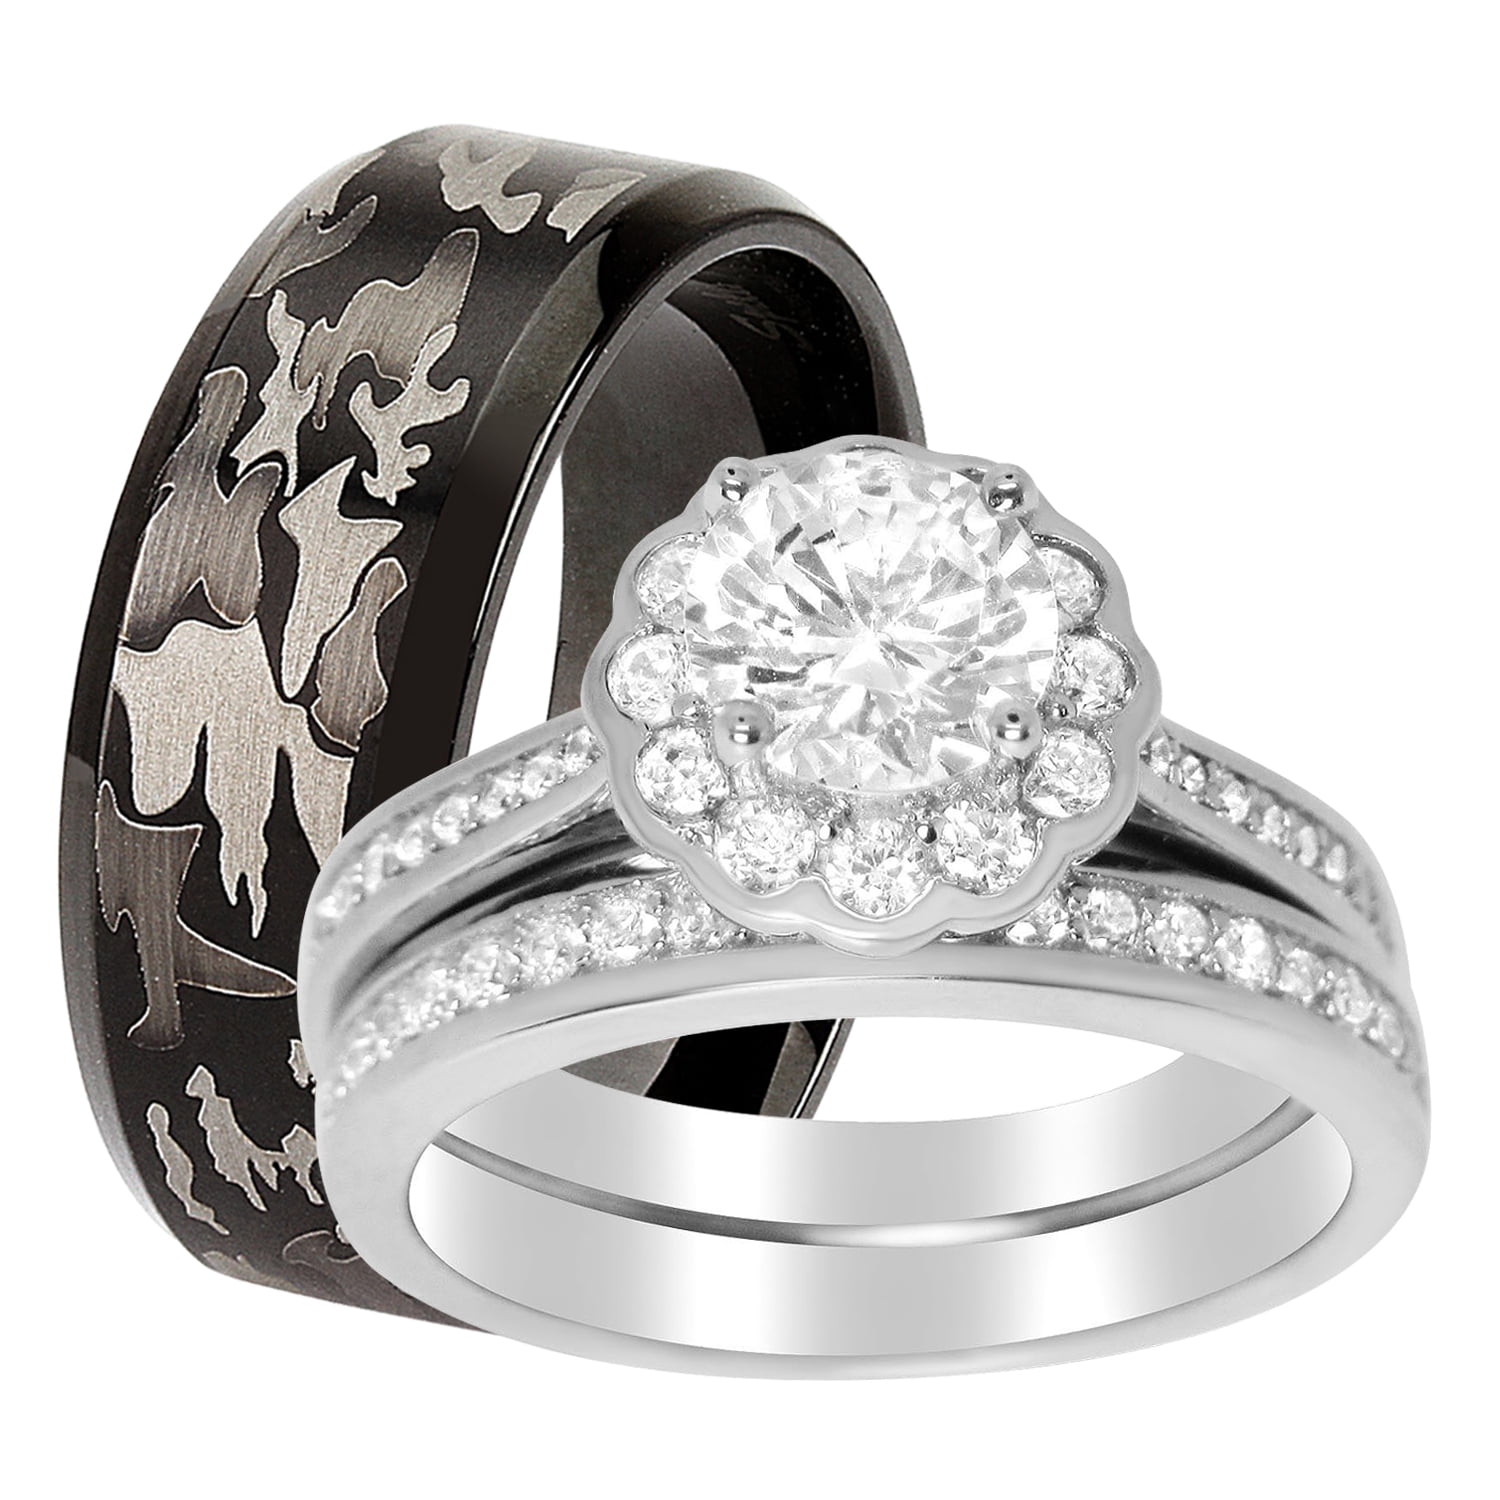 De gasten Hover tiener Matching Wedding Rings for Him and Her Halo Bridal Set for Women Size 7 and  Black Wedding Band for Men Size 10 - Walmart.com